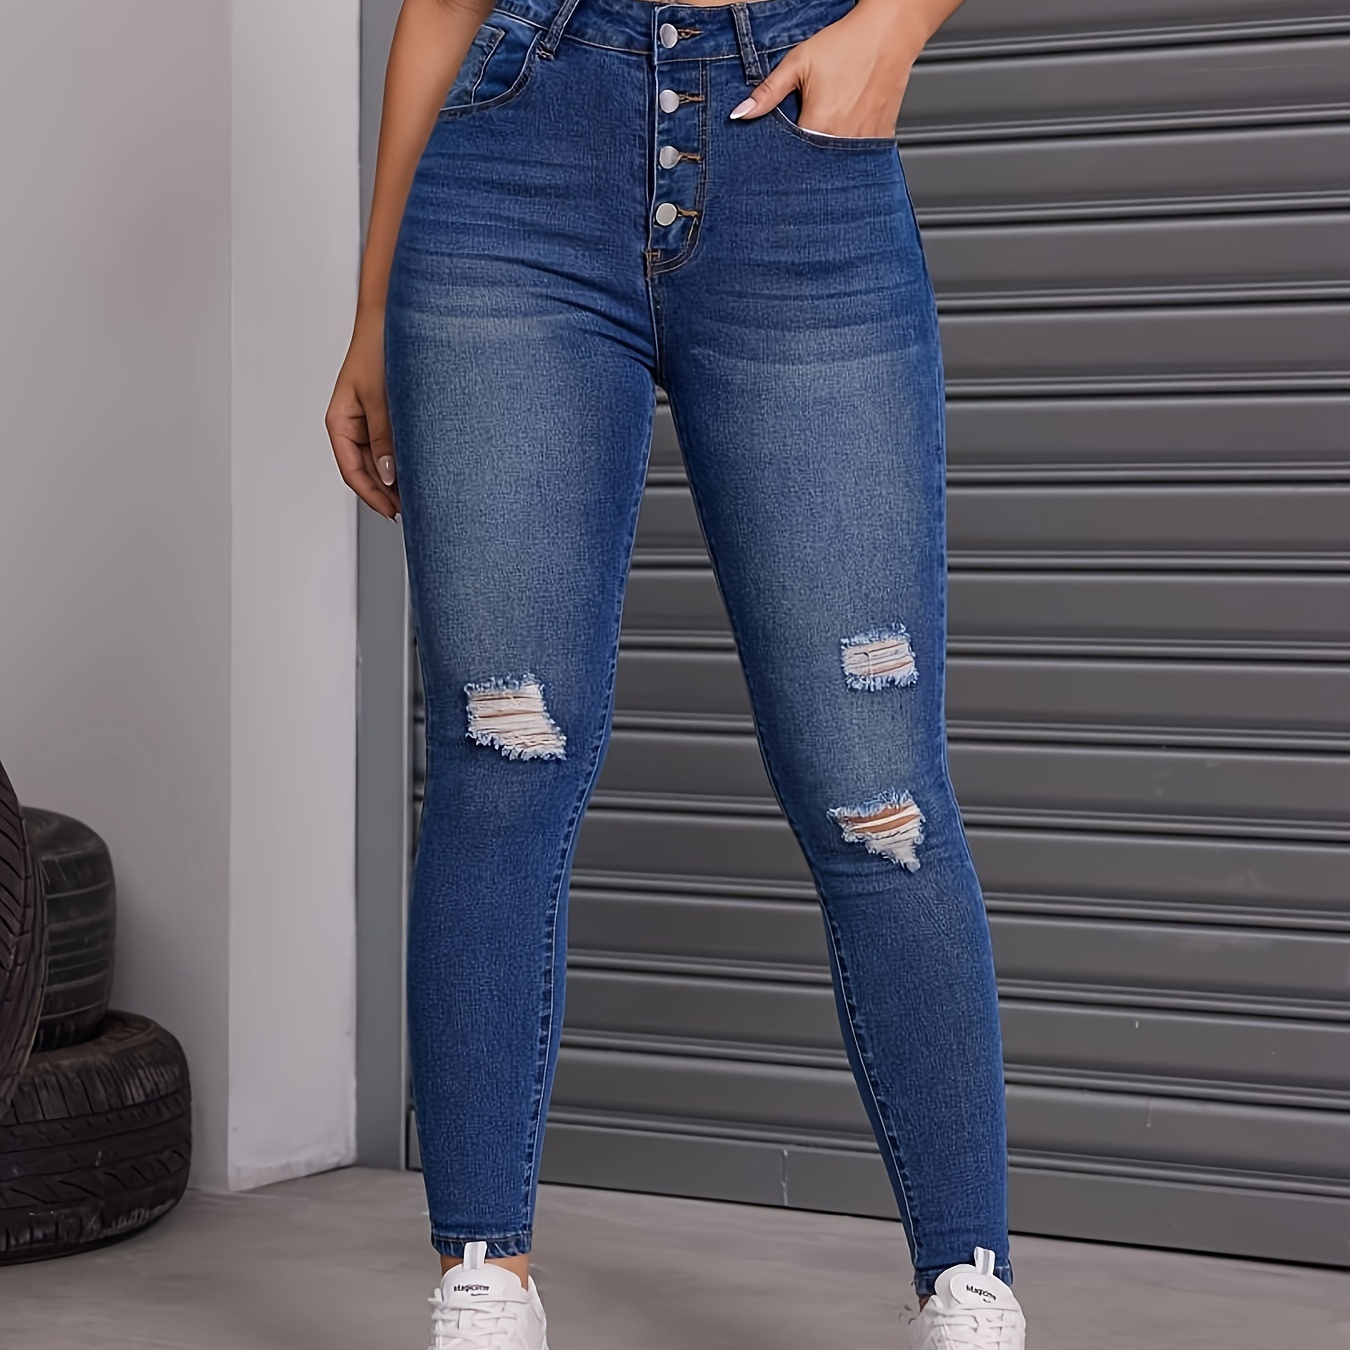 

Blue Ripped Holes Skinny Jeans, Single Breasted Button Washed Tight Jeans, Women's Denim Jeans & Clothing